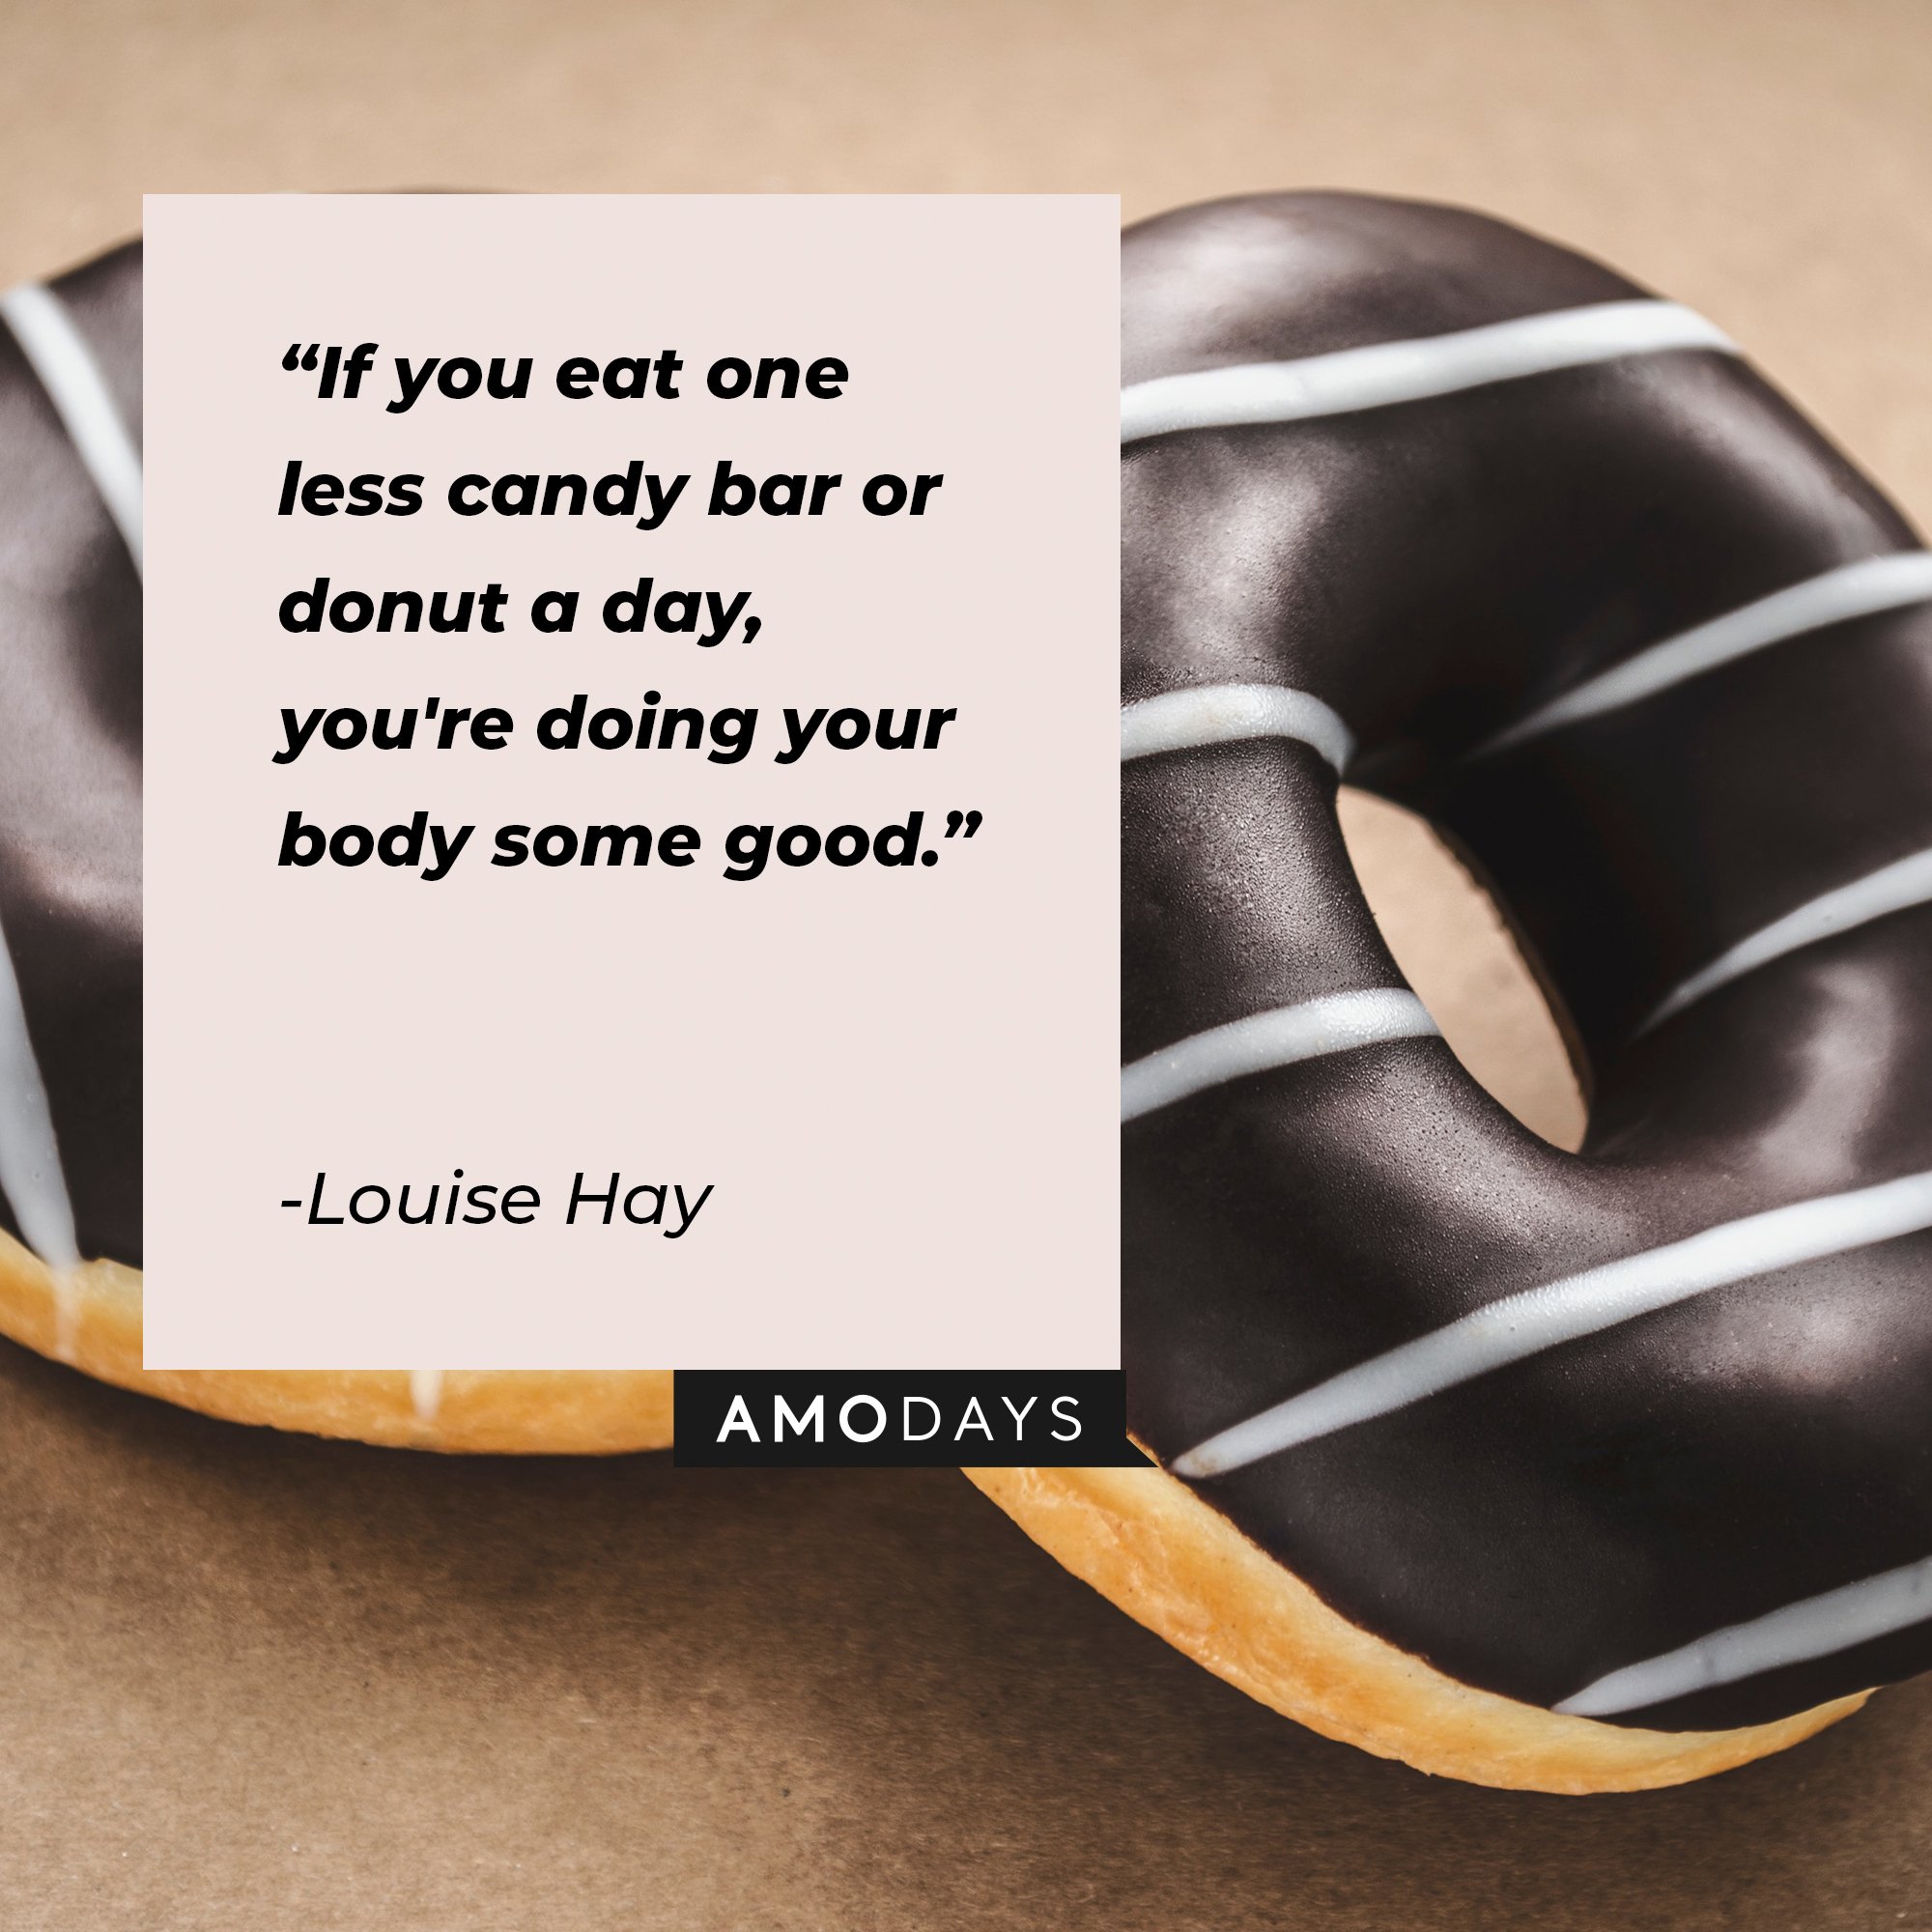 Louise Hay's quote: "If you eat one less candy bar or donut a day, you're doing your body some good." | Image: AmoDays